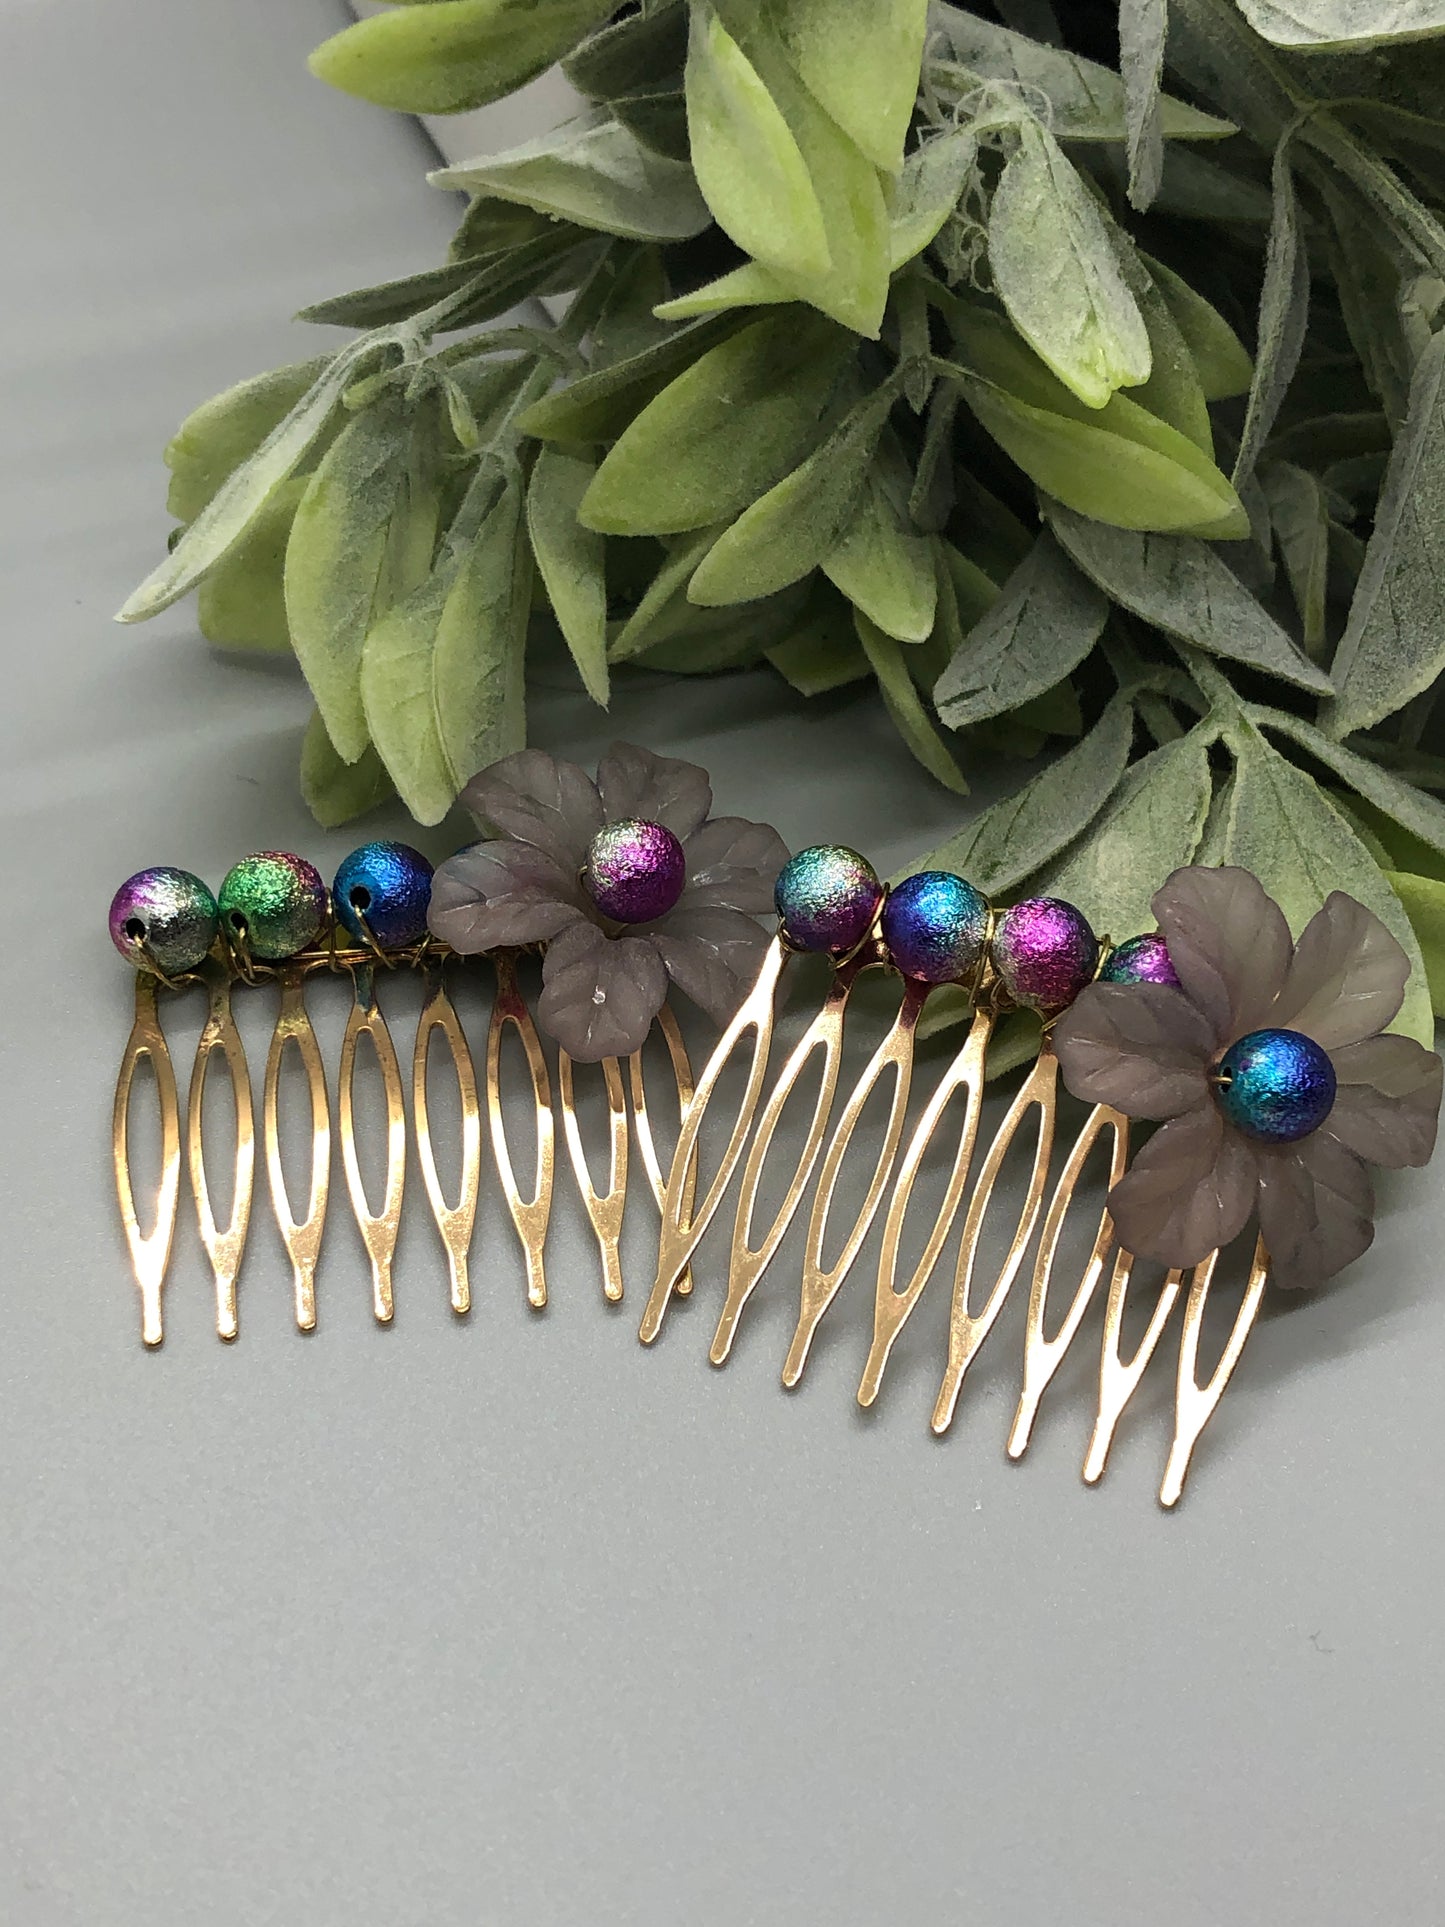 Gray Acrylic Flower Peacock Multi Color Beads 2.0" Metal Side Comb Retro Vintage Style 2 pc